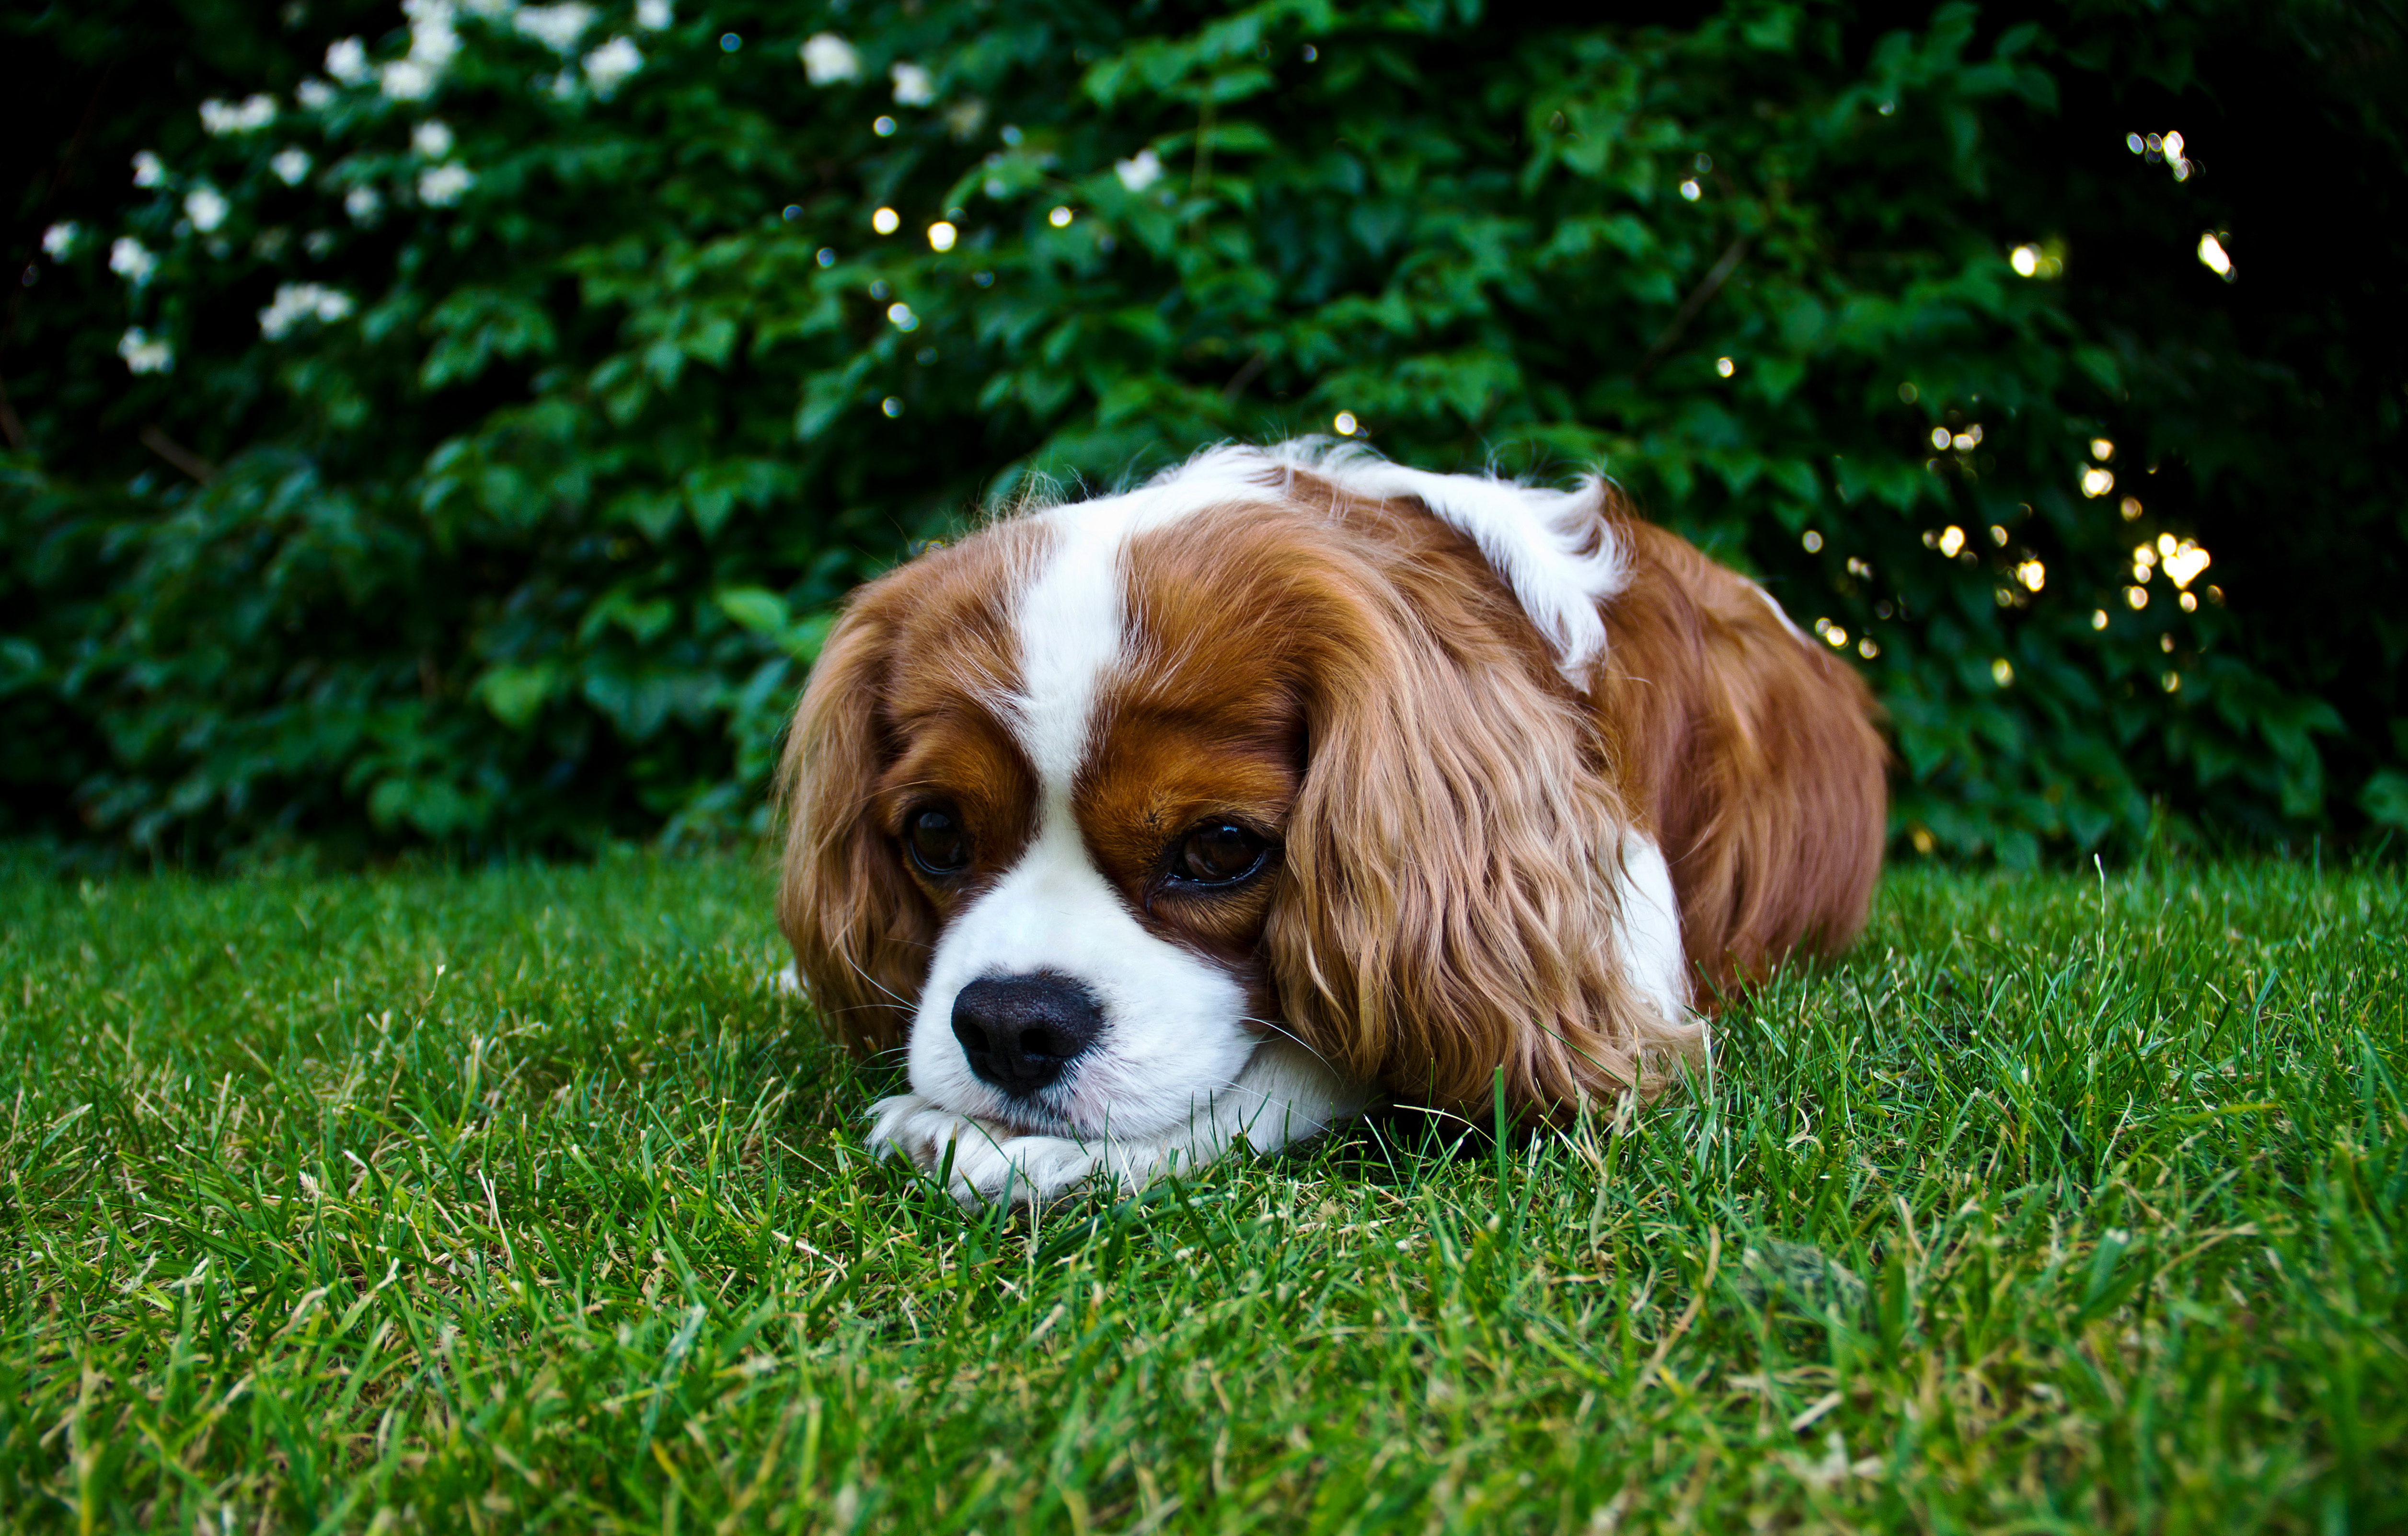 File:Dog In The Grass.jpg - Wikimedia Commons